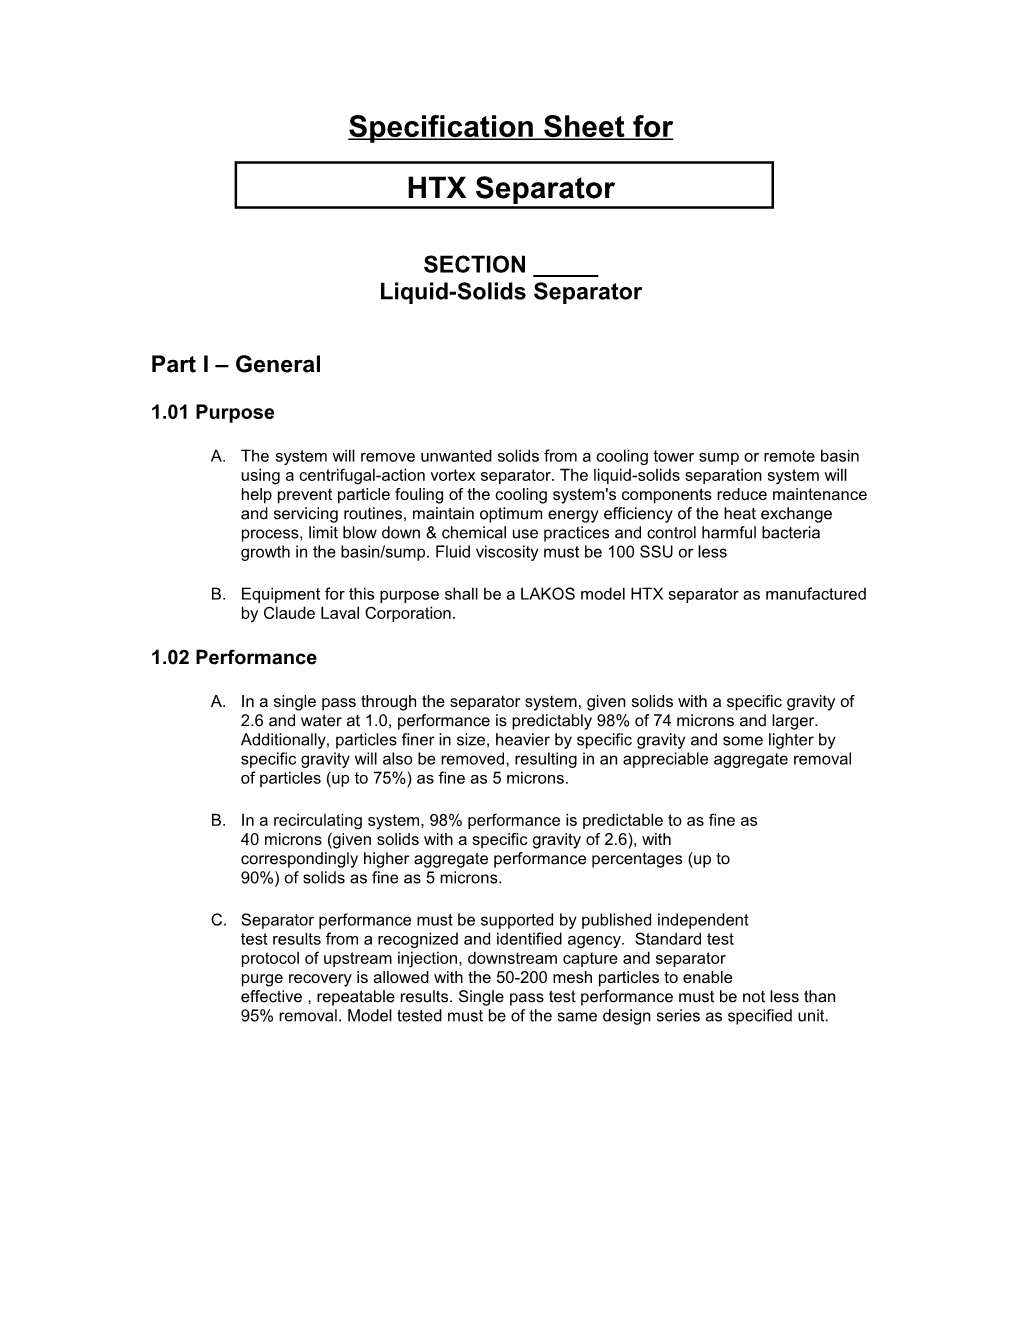 Specification Sheet For